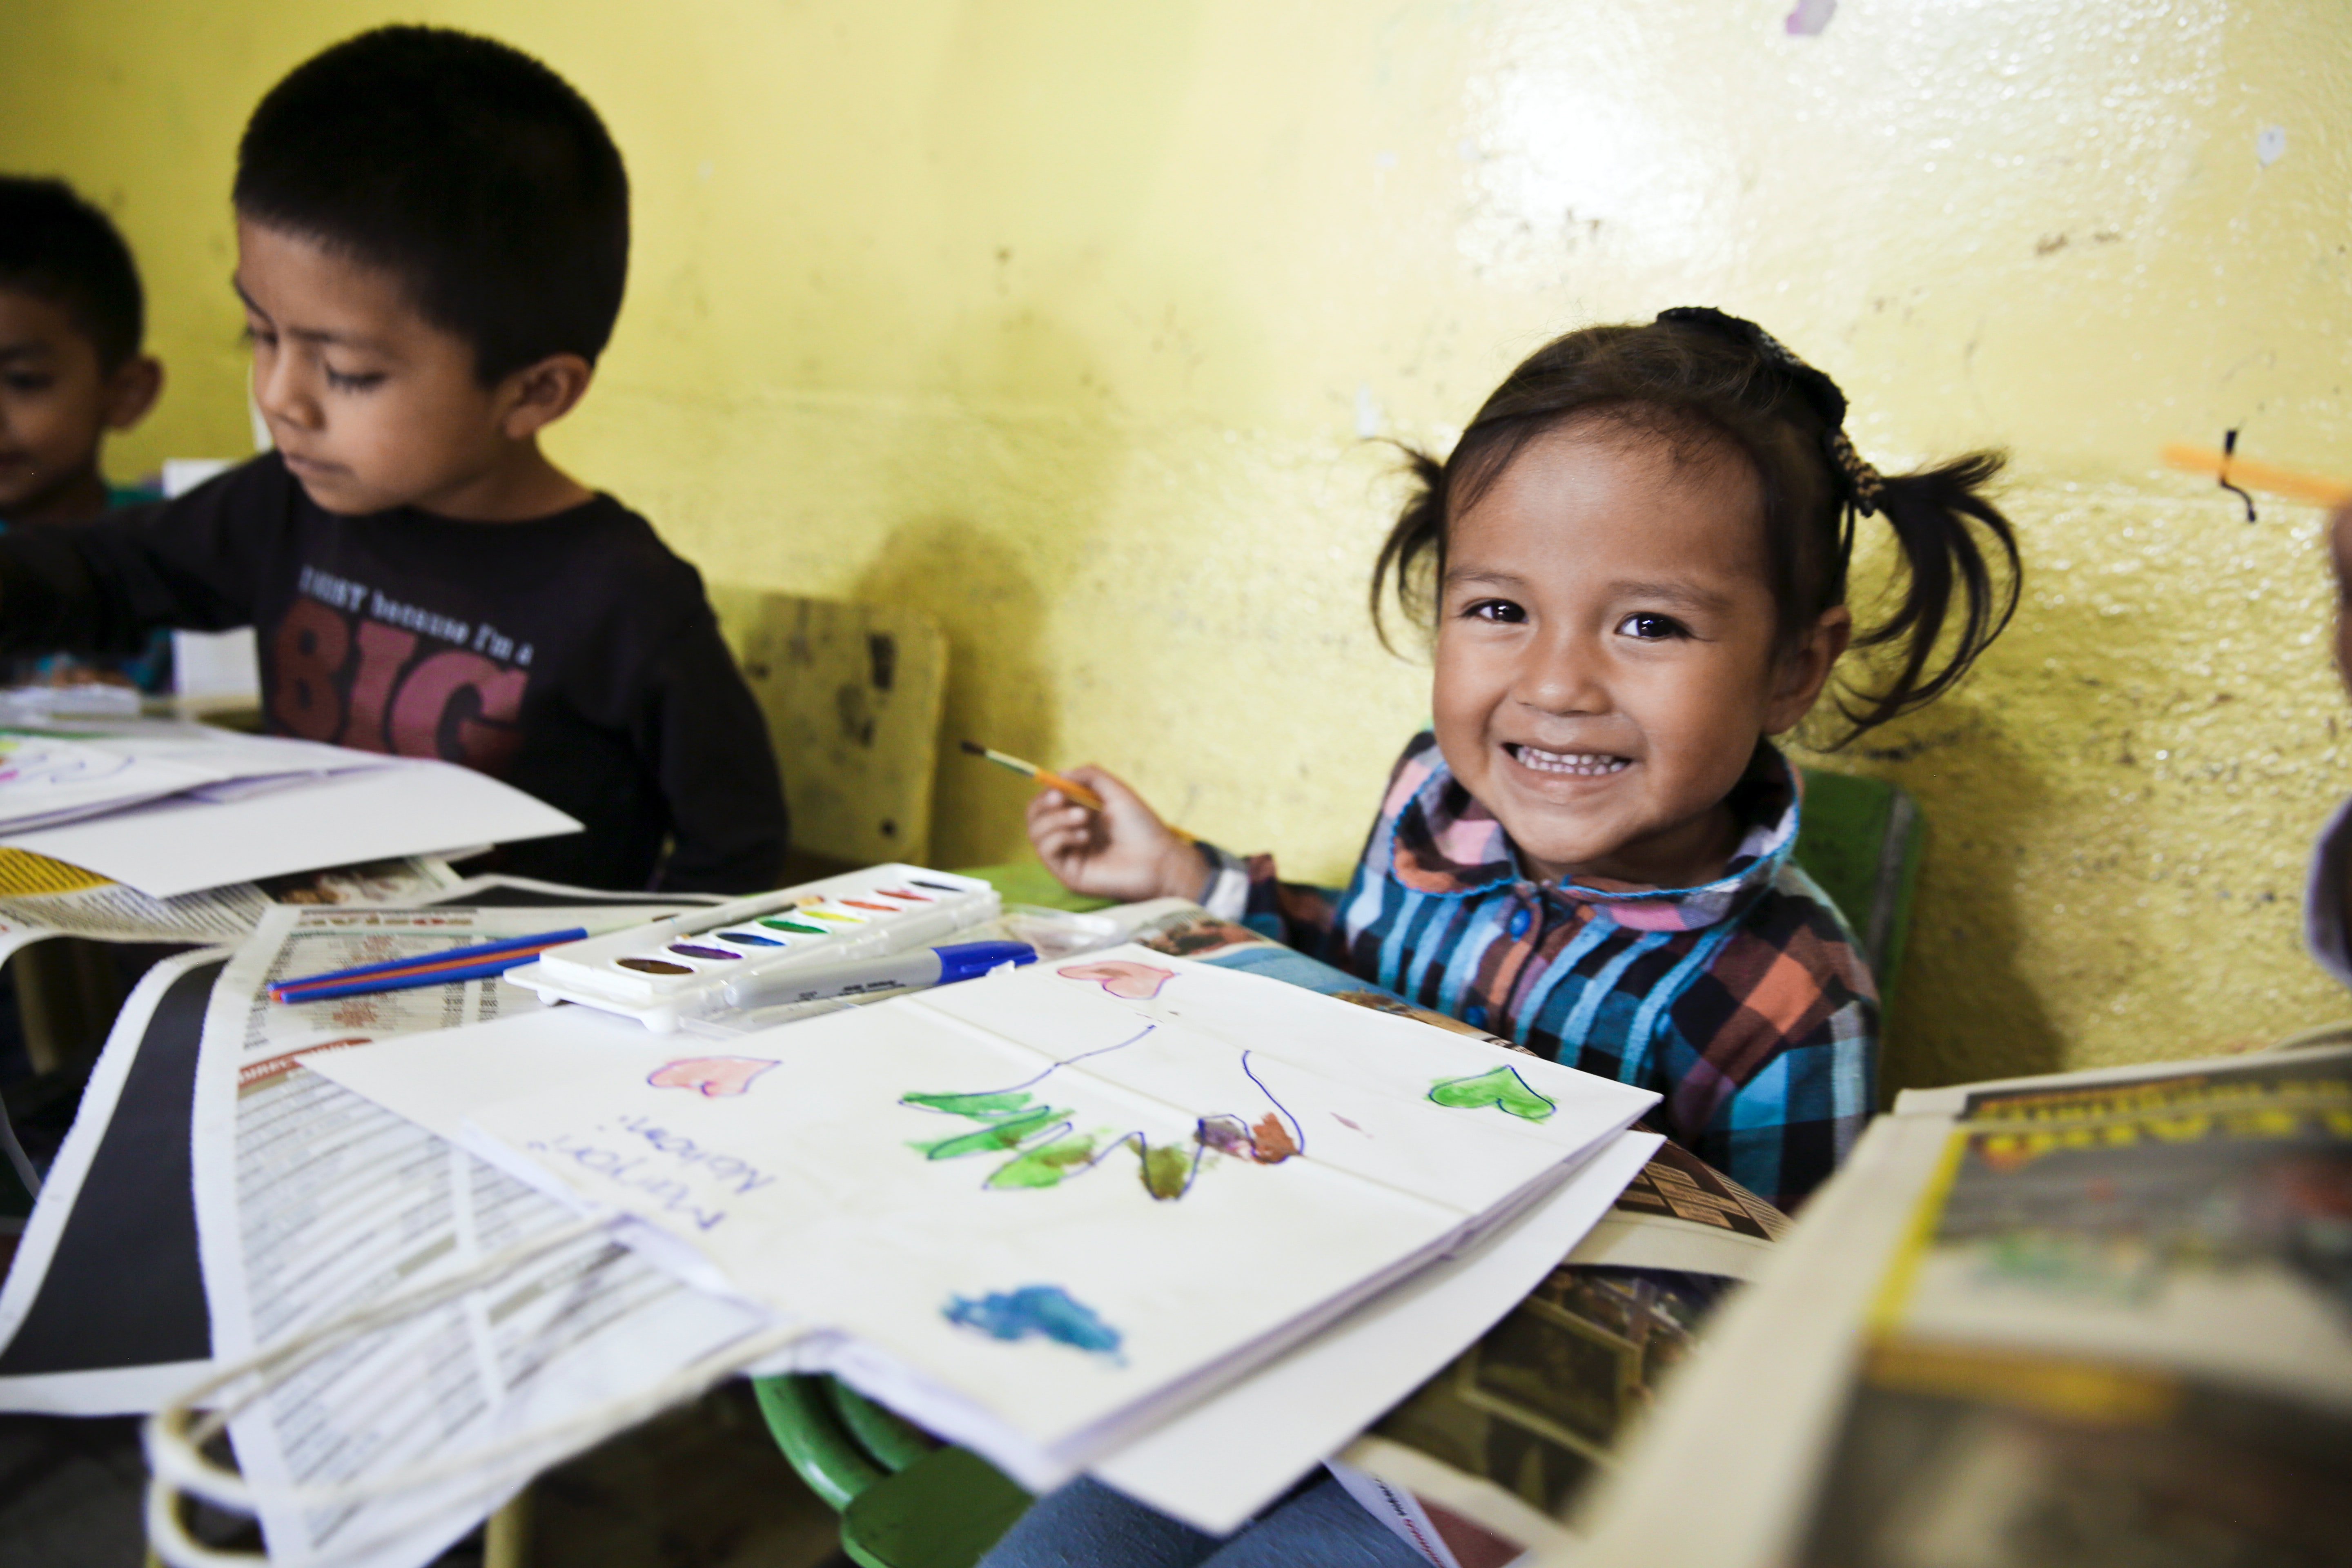 Smiling children in a day-care facility